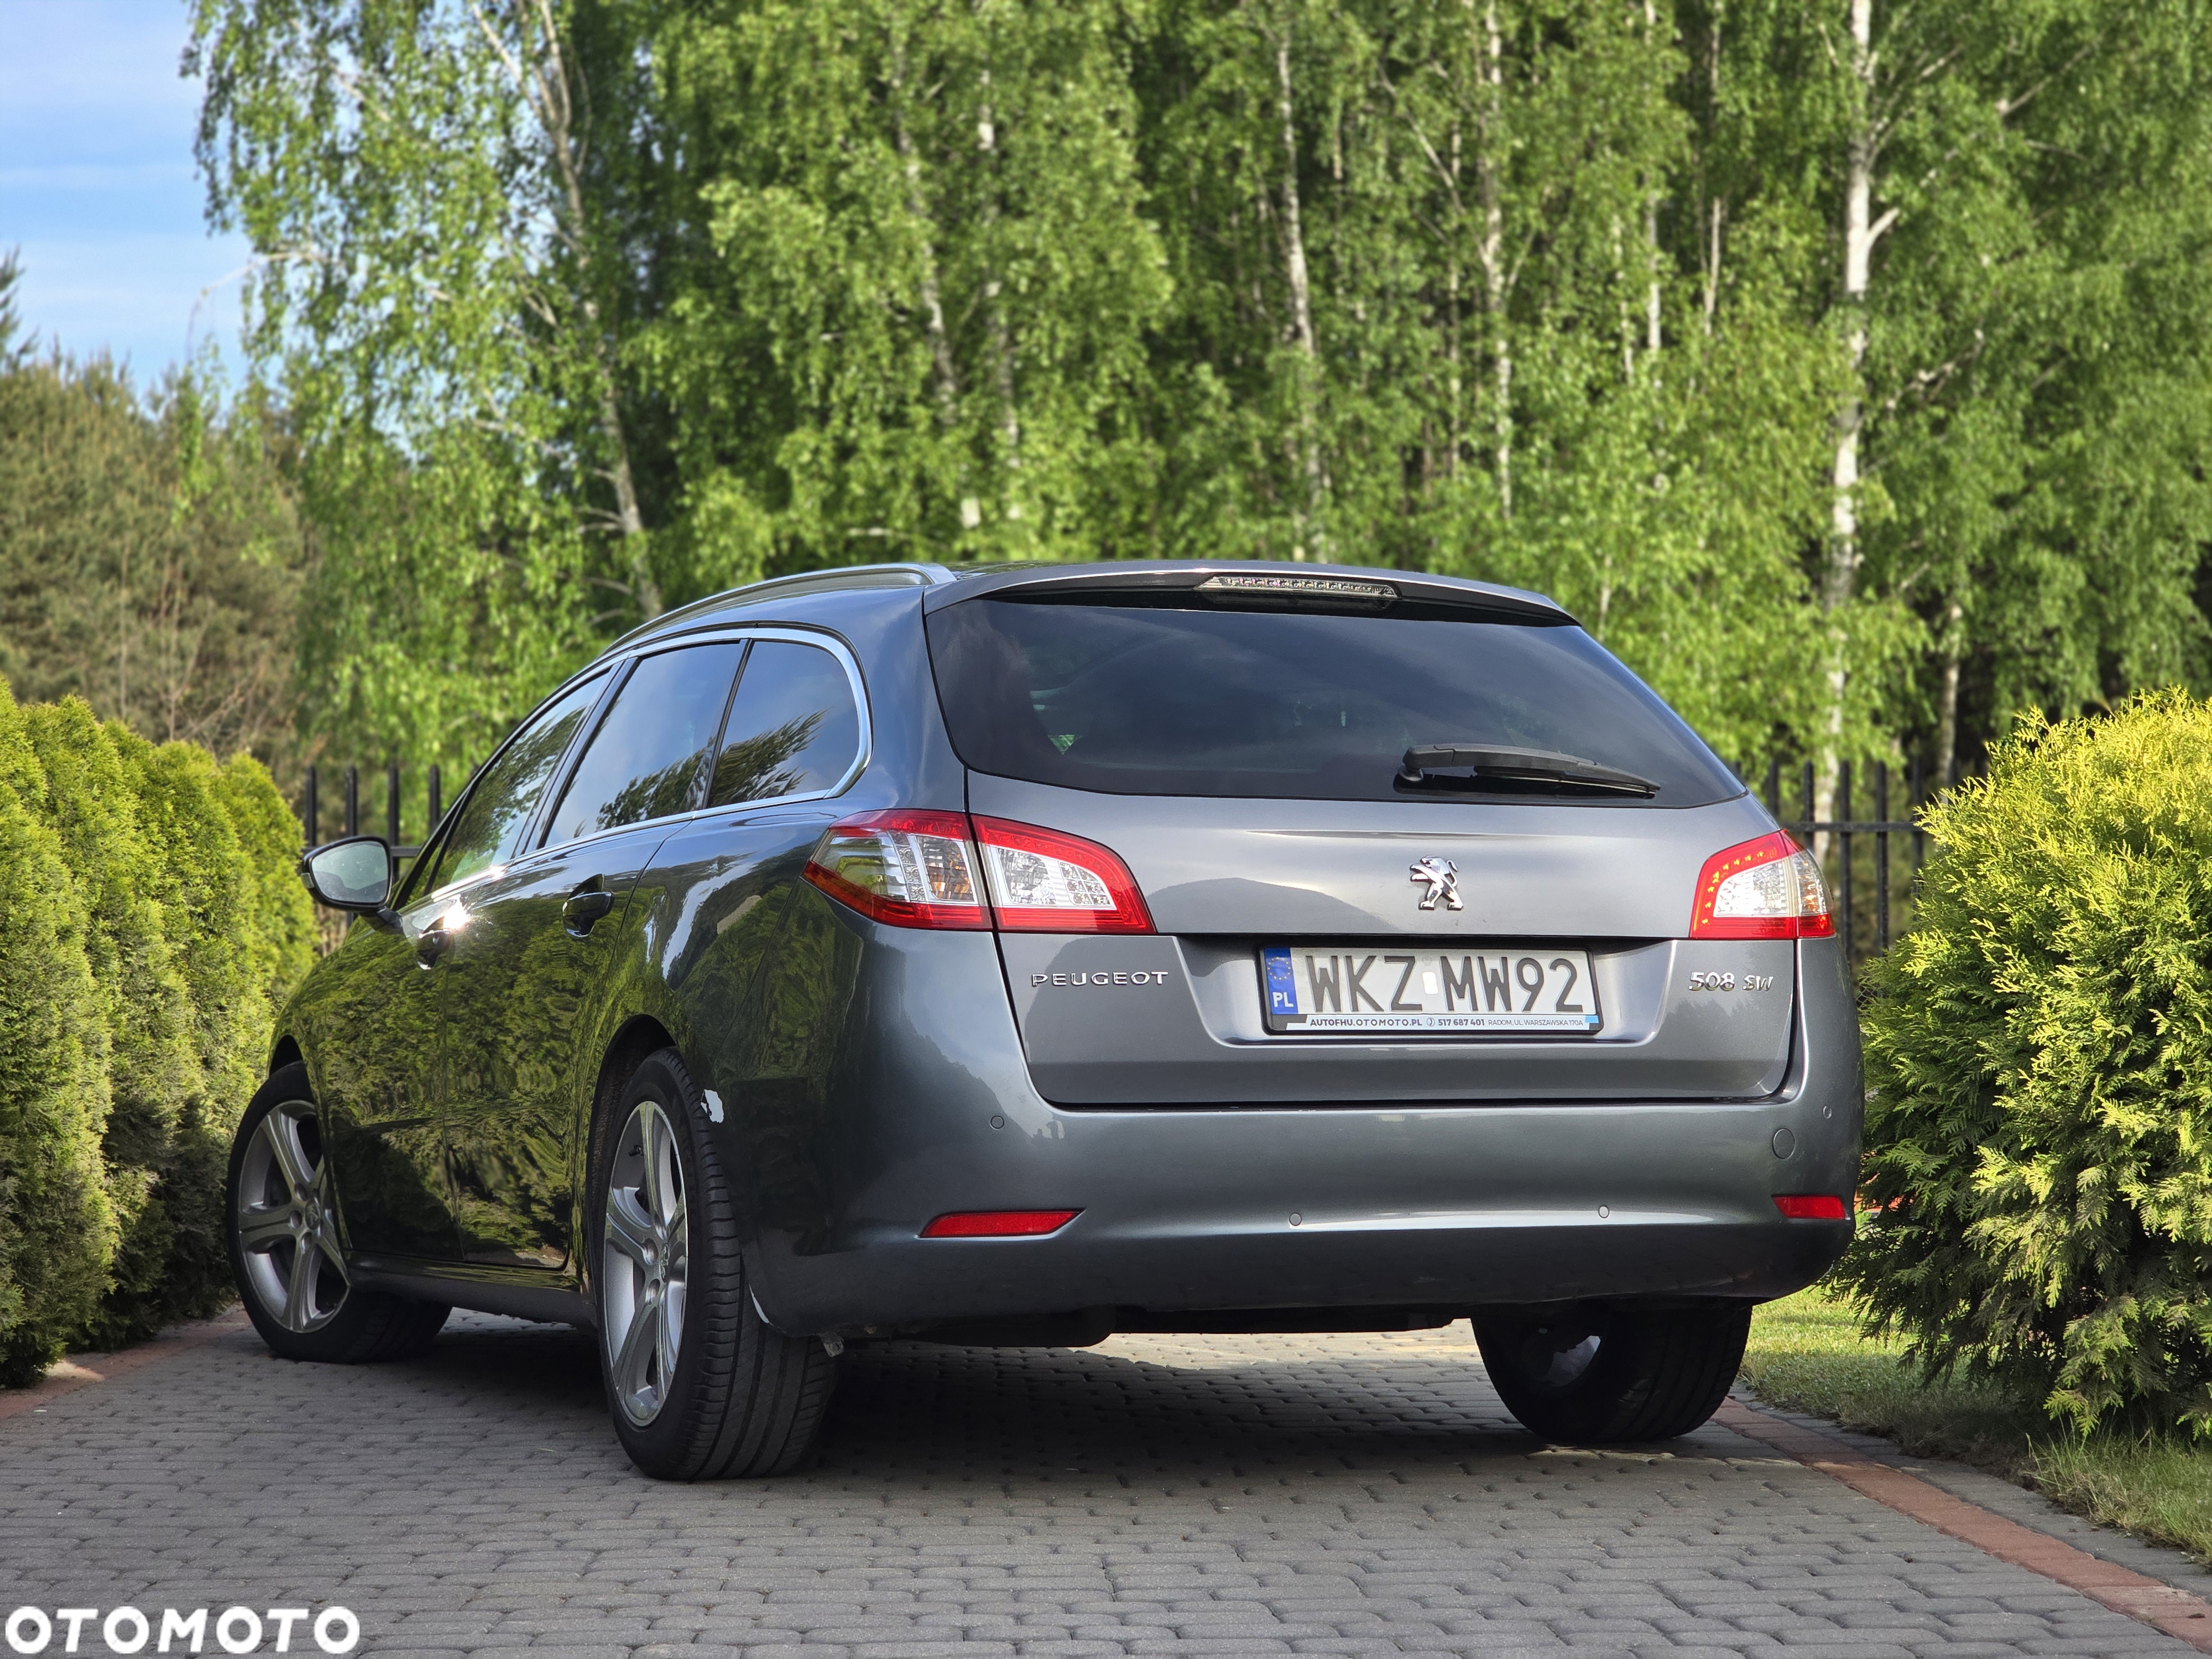 Peugeot 508 2.0 HDi Business Line - 22